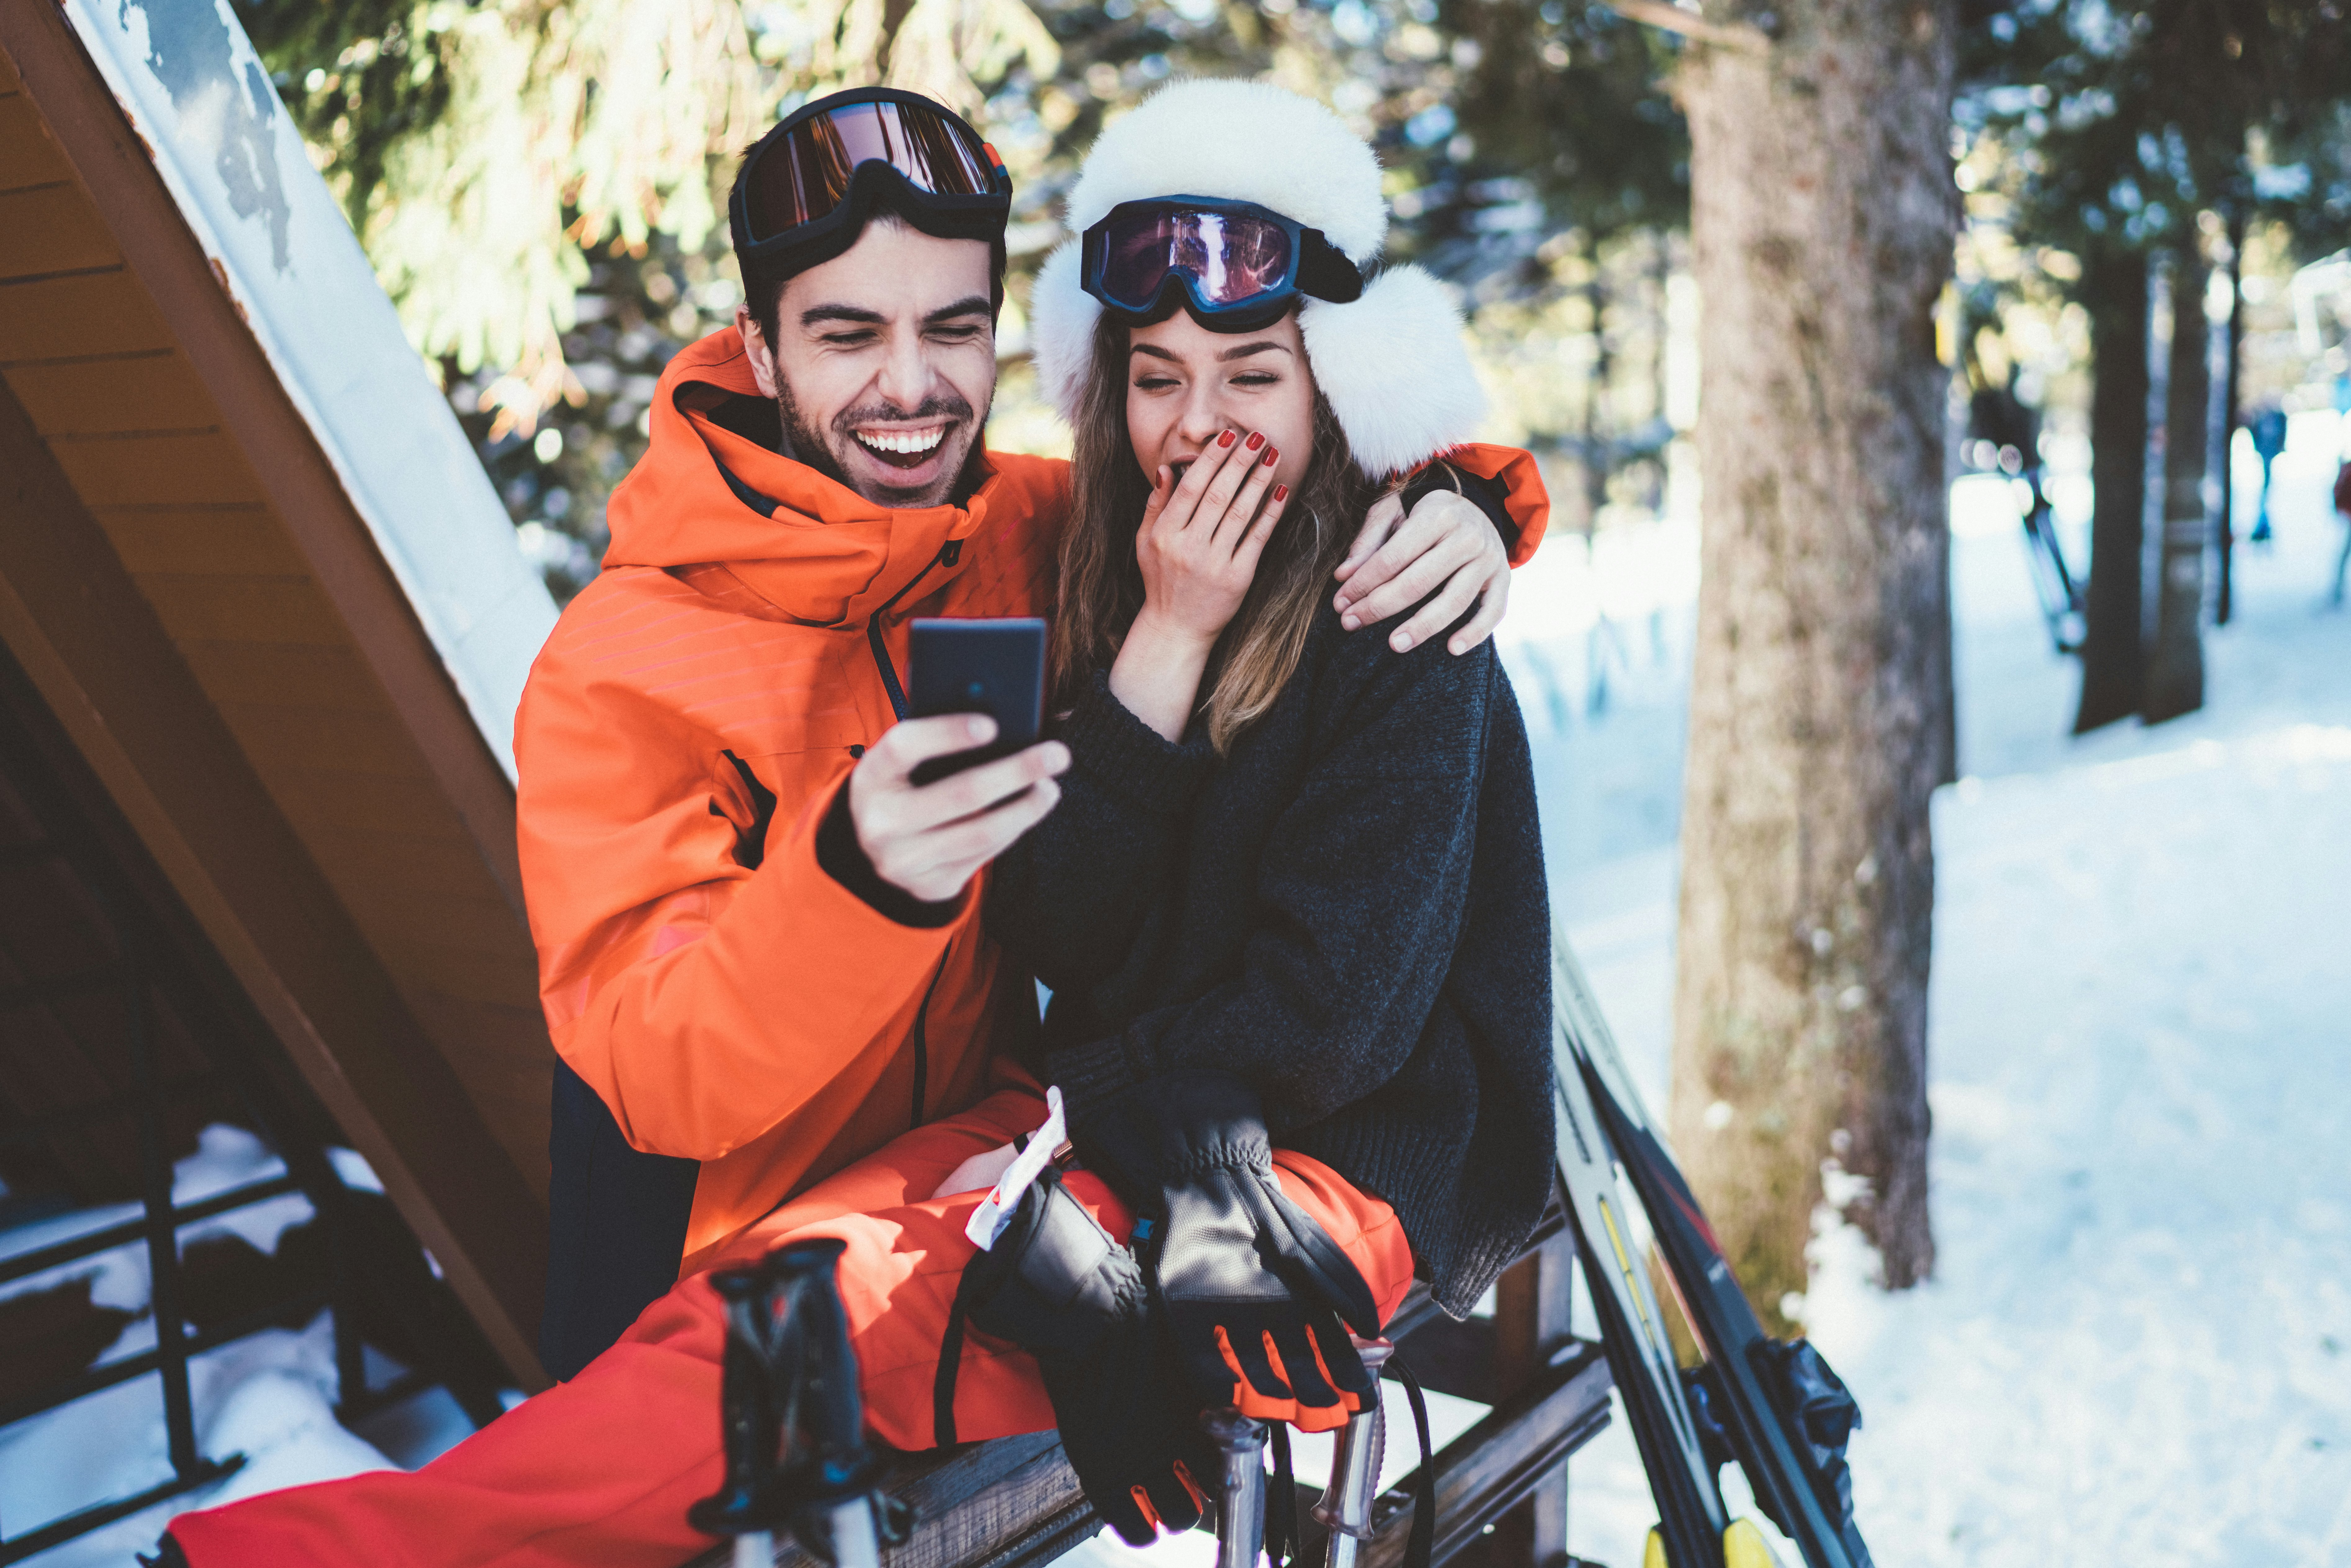 30 Captions For Skiing With Your Partner That Sum Up The Frosty